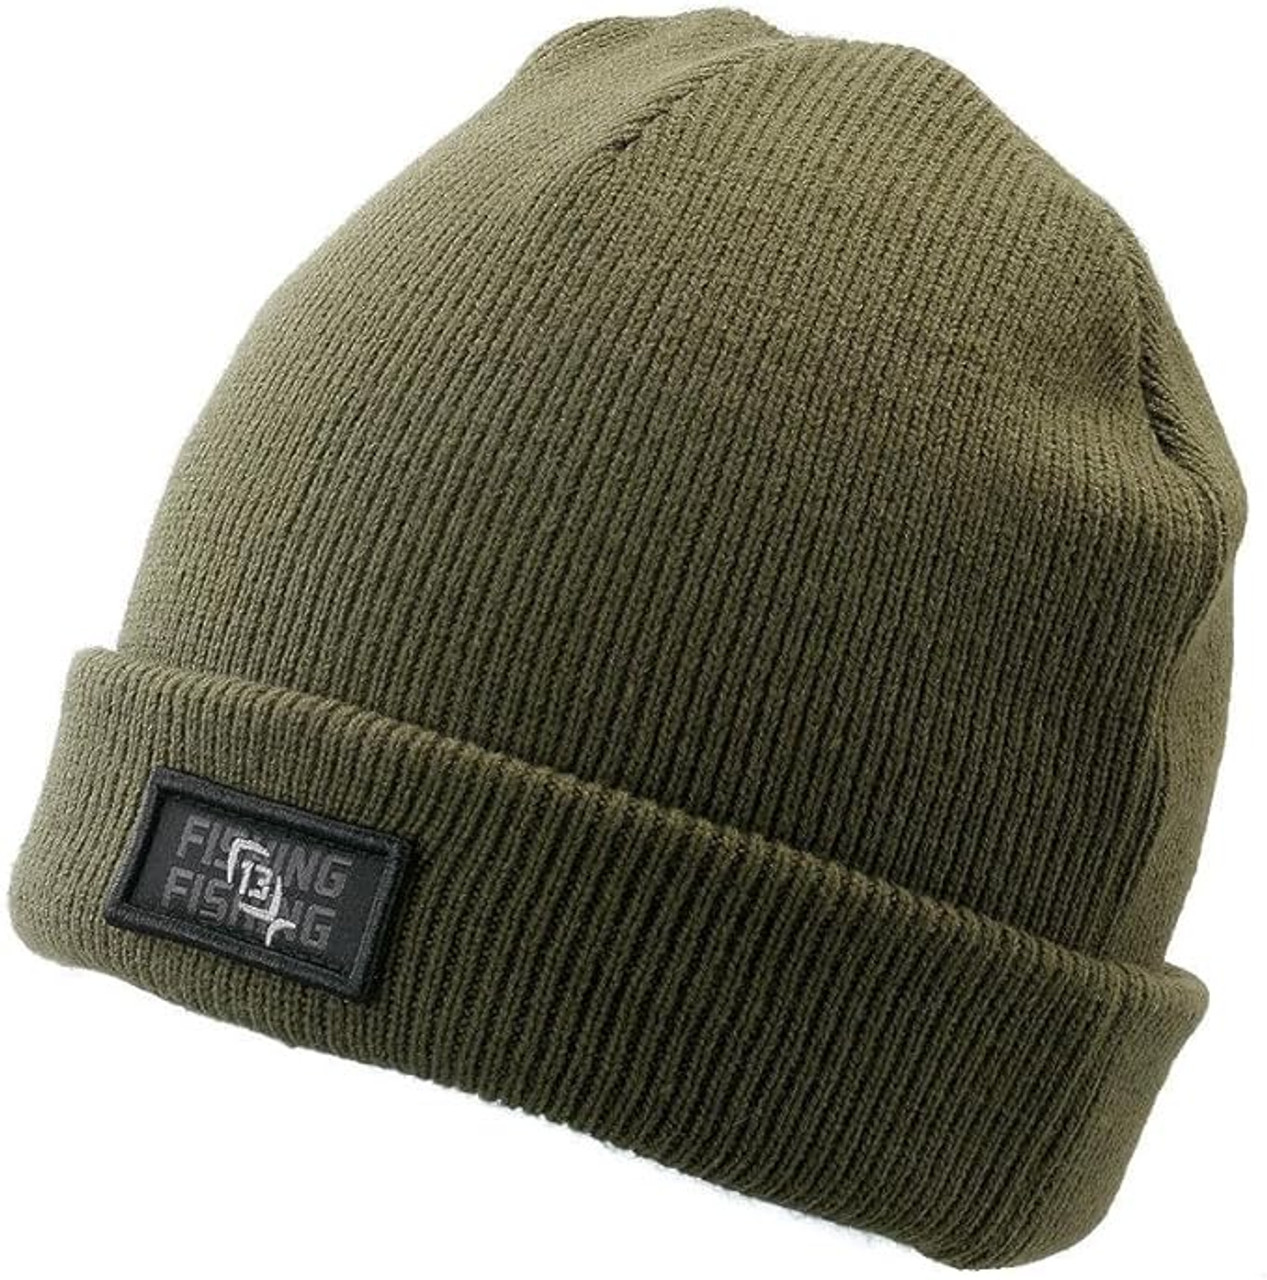 Dutch Oven Green 13 Fishing Knitted Cap - GoIceFish